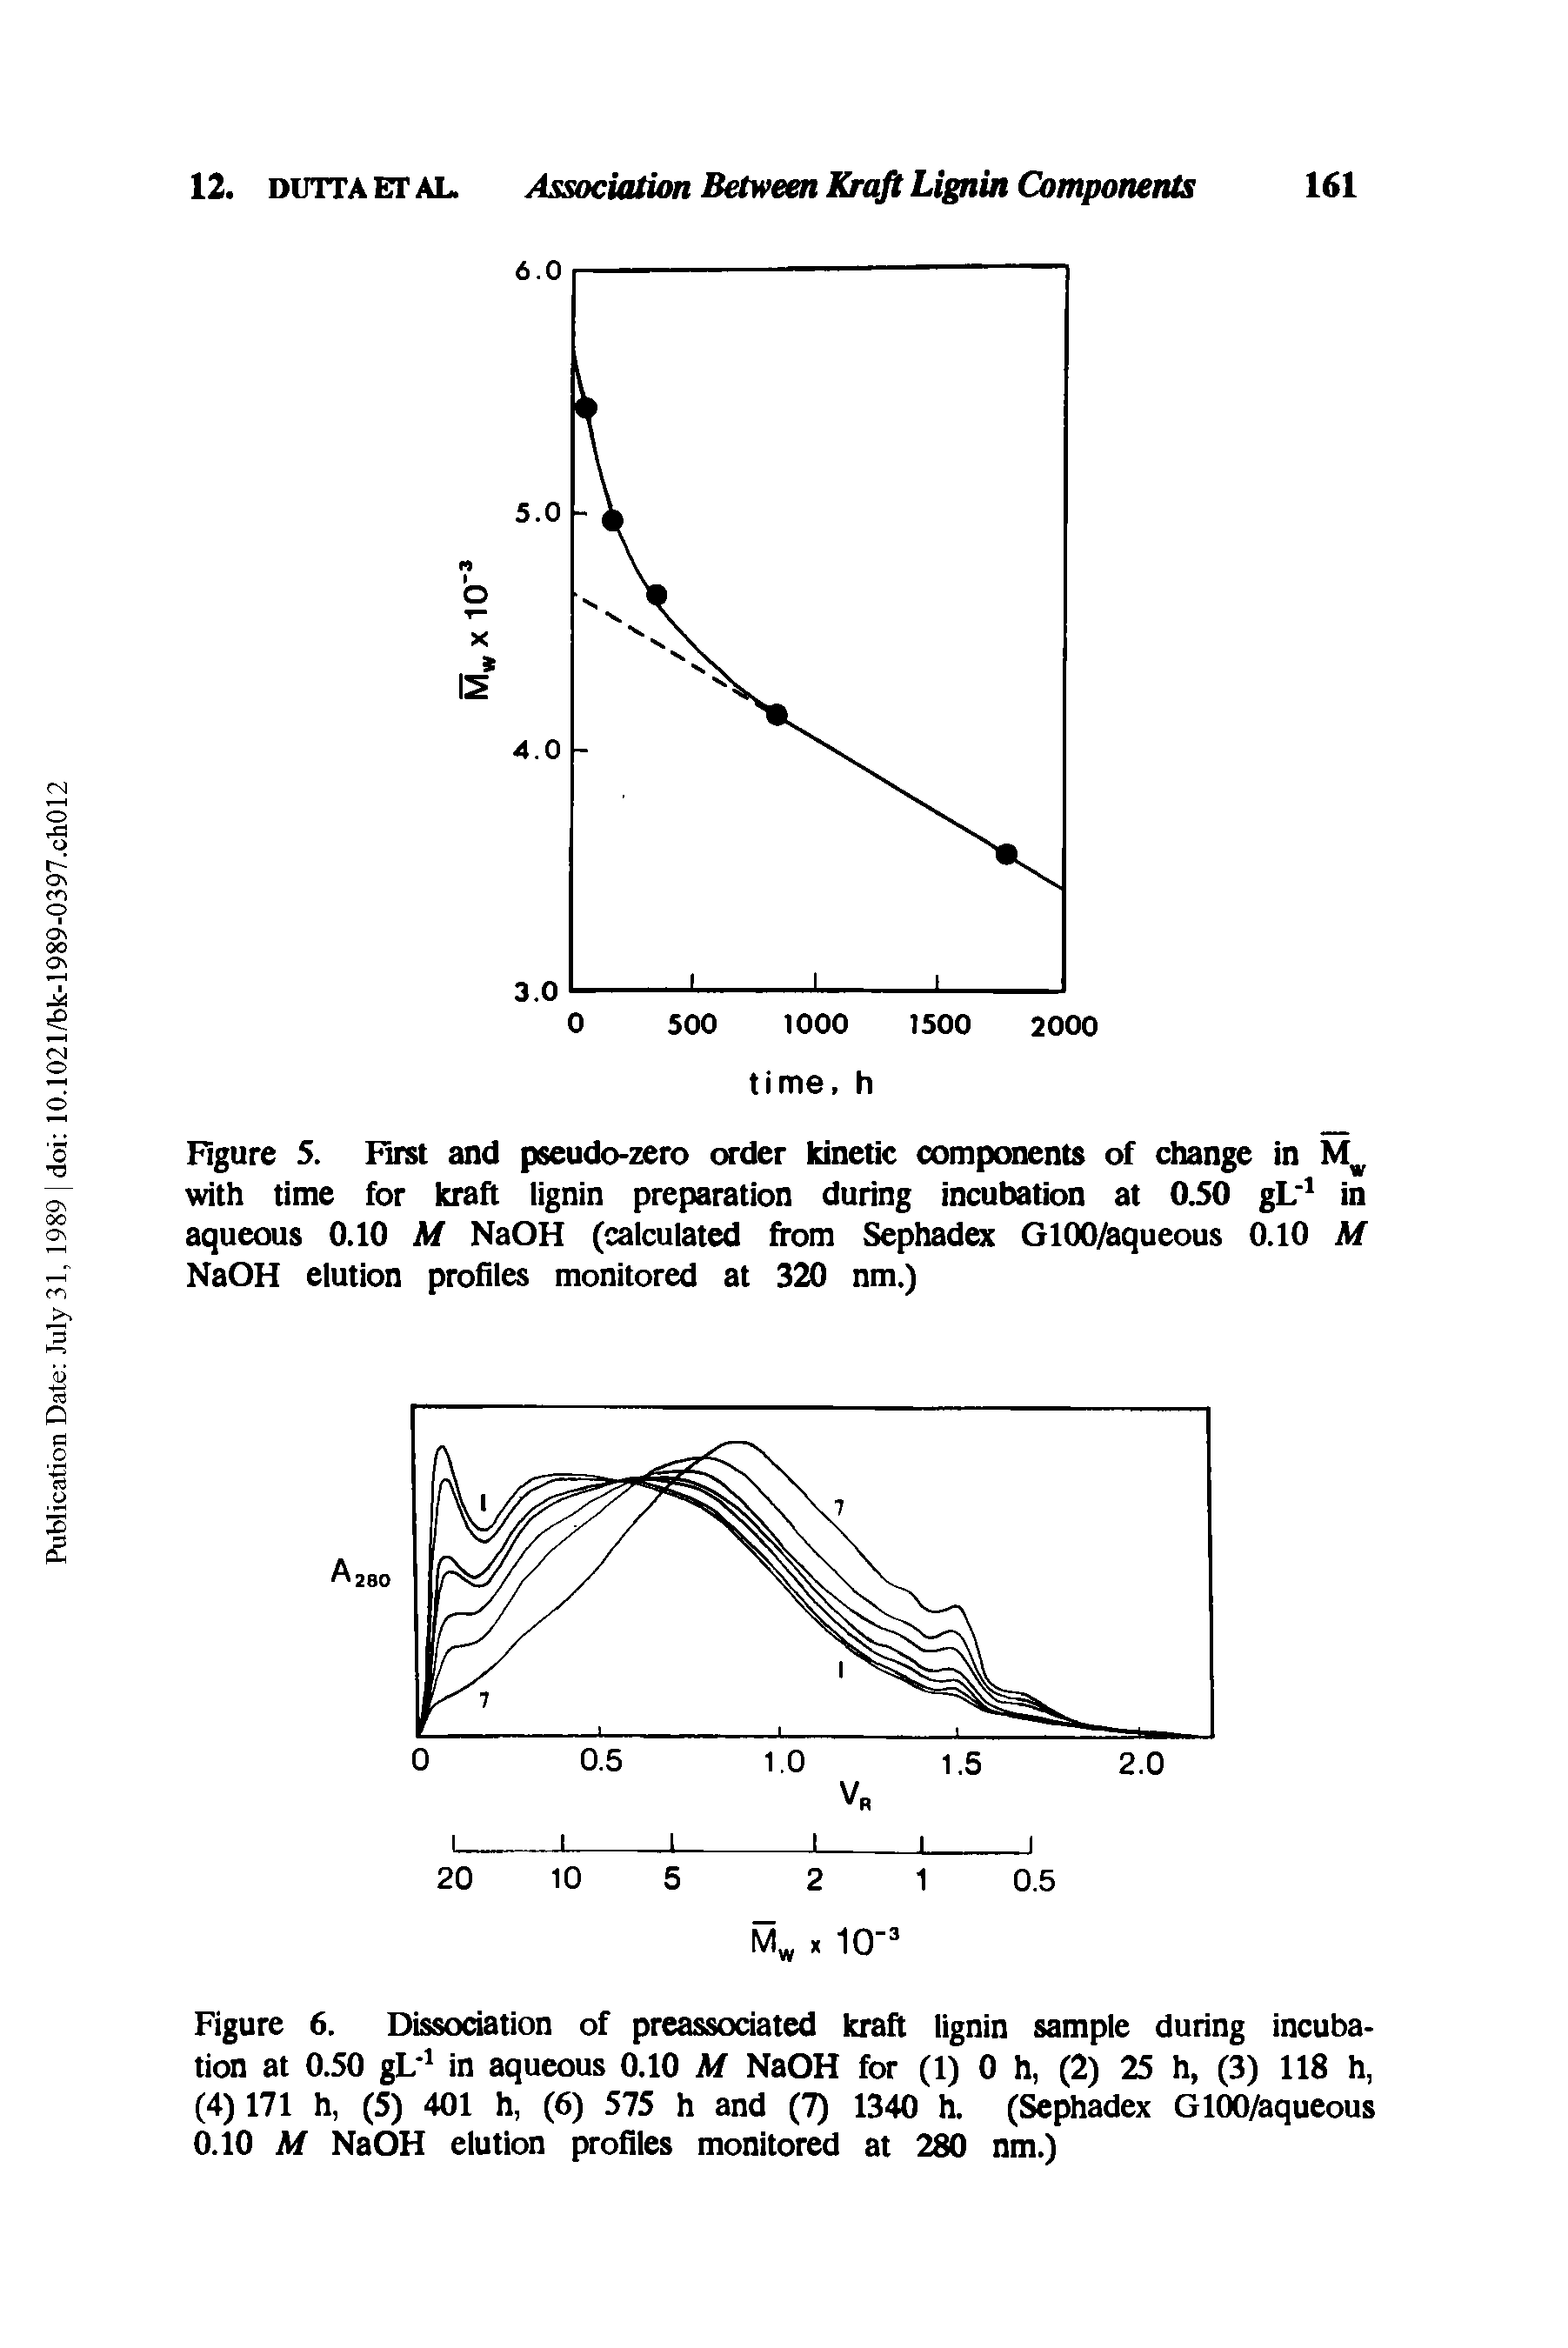 Figure 5. First and pseudo-zero order kinetic components of change in Mw...